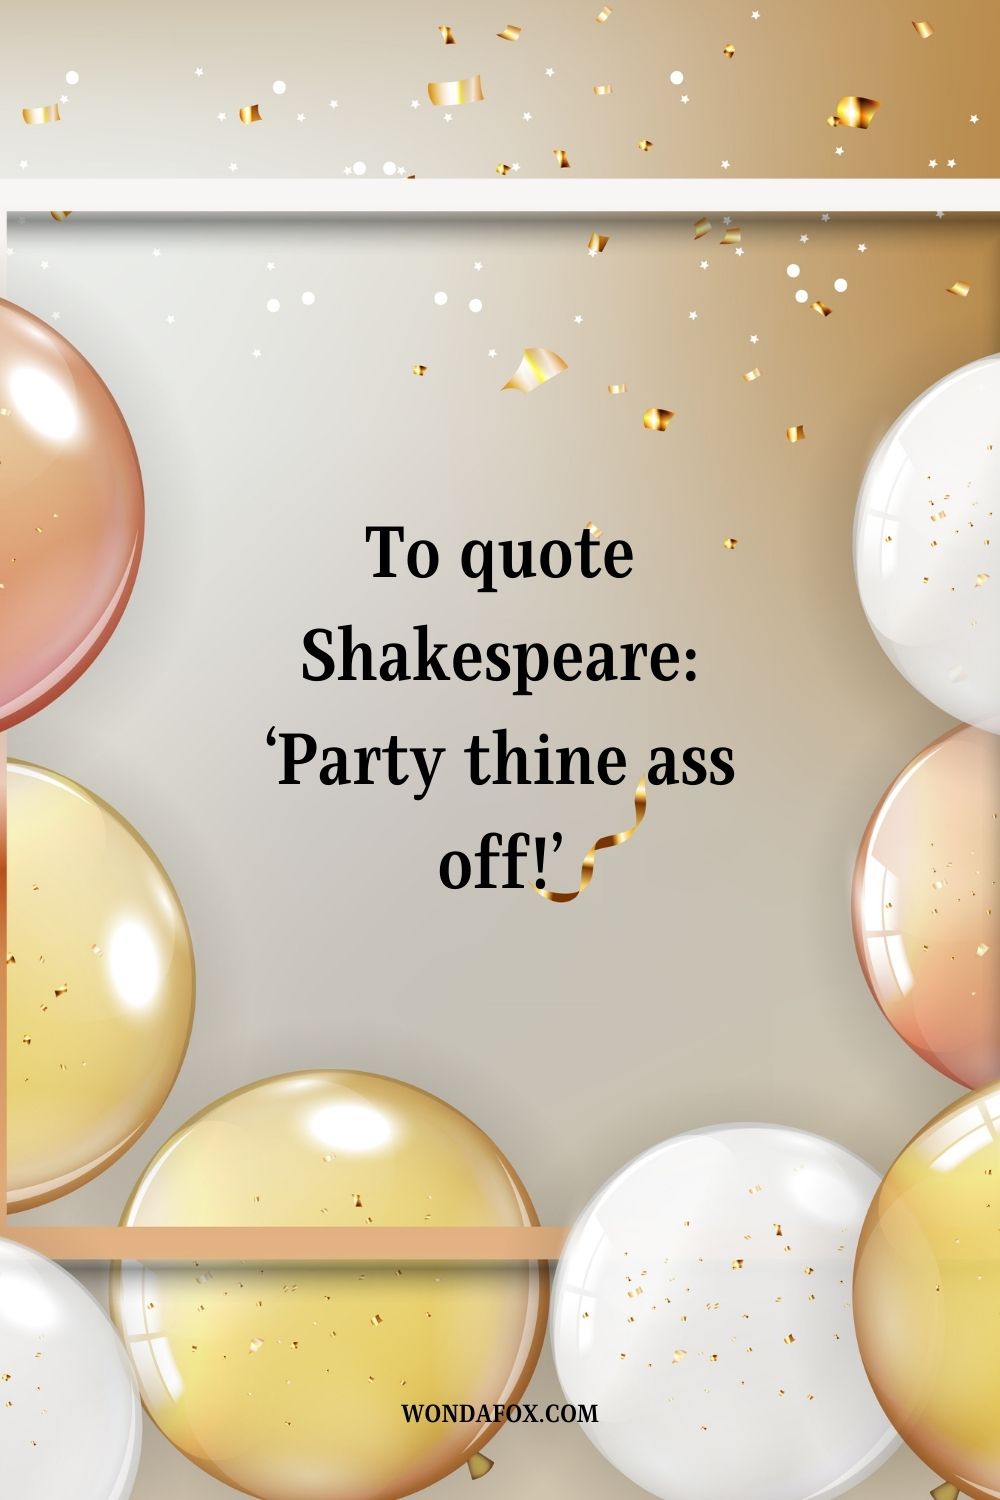 “To quote Shakespeare: ‘Party thine ass off!’”